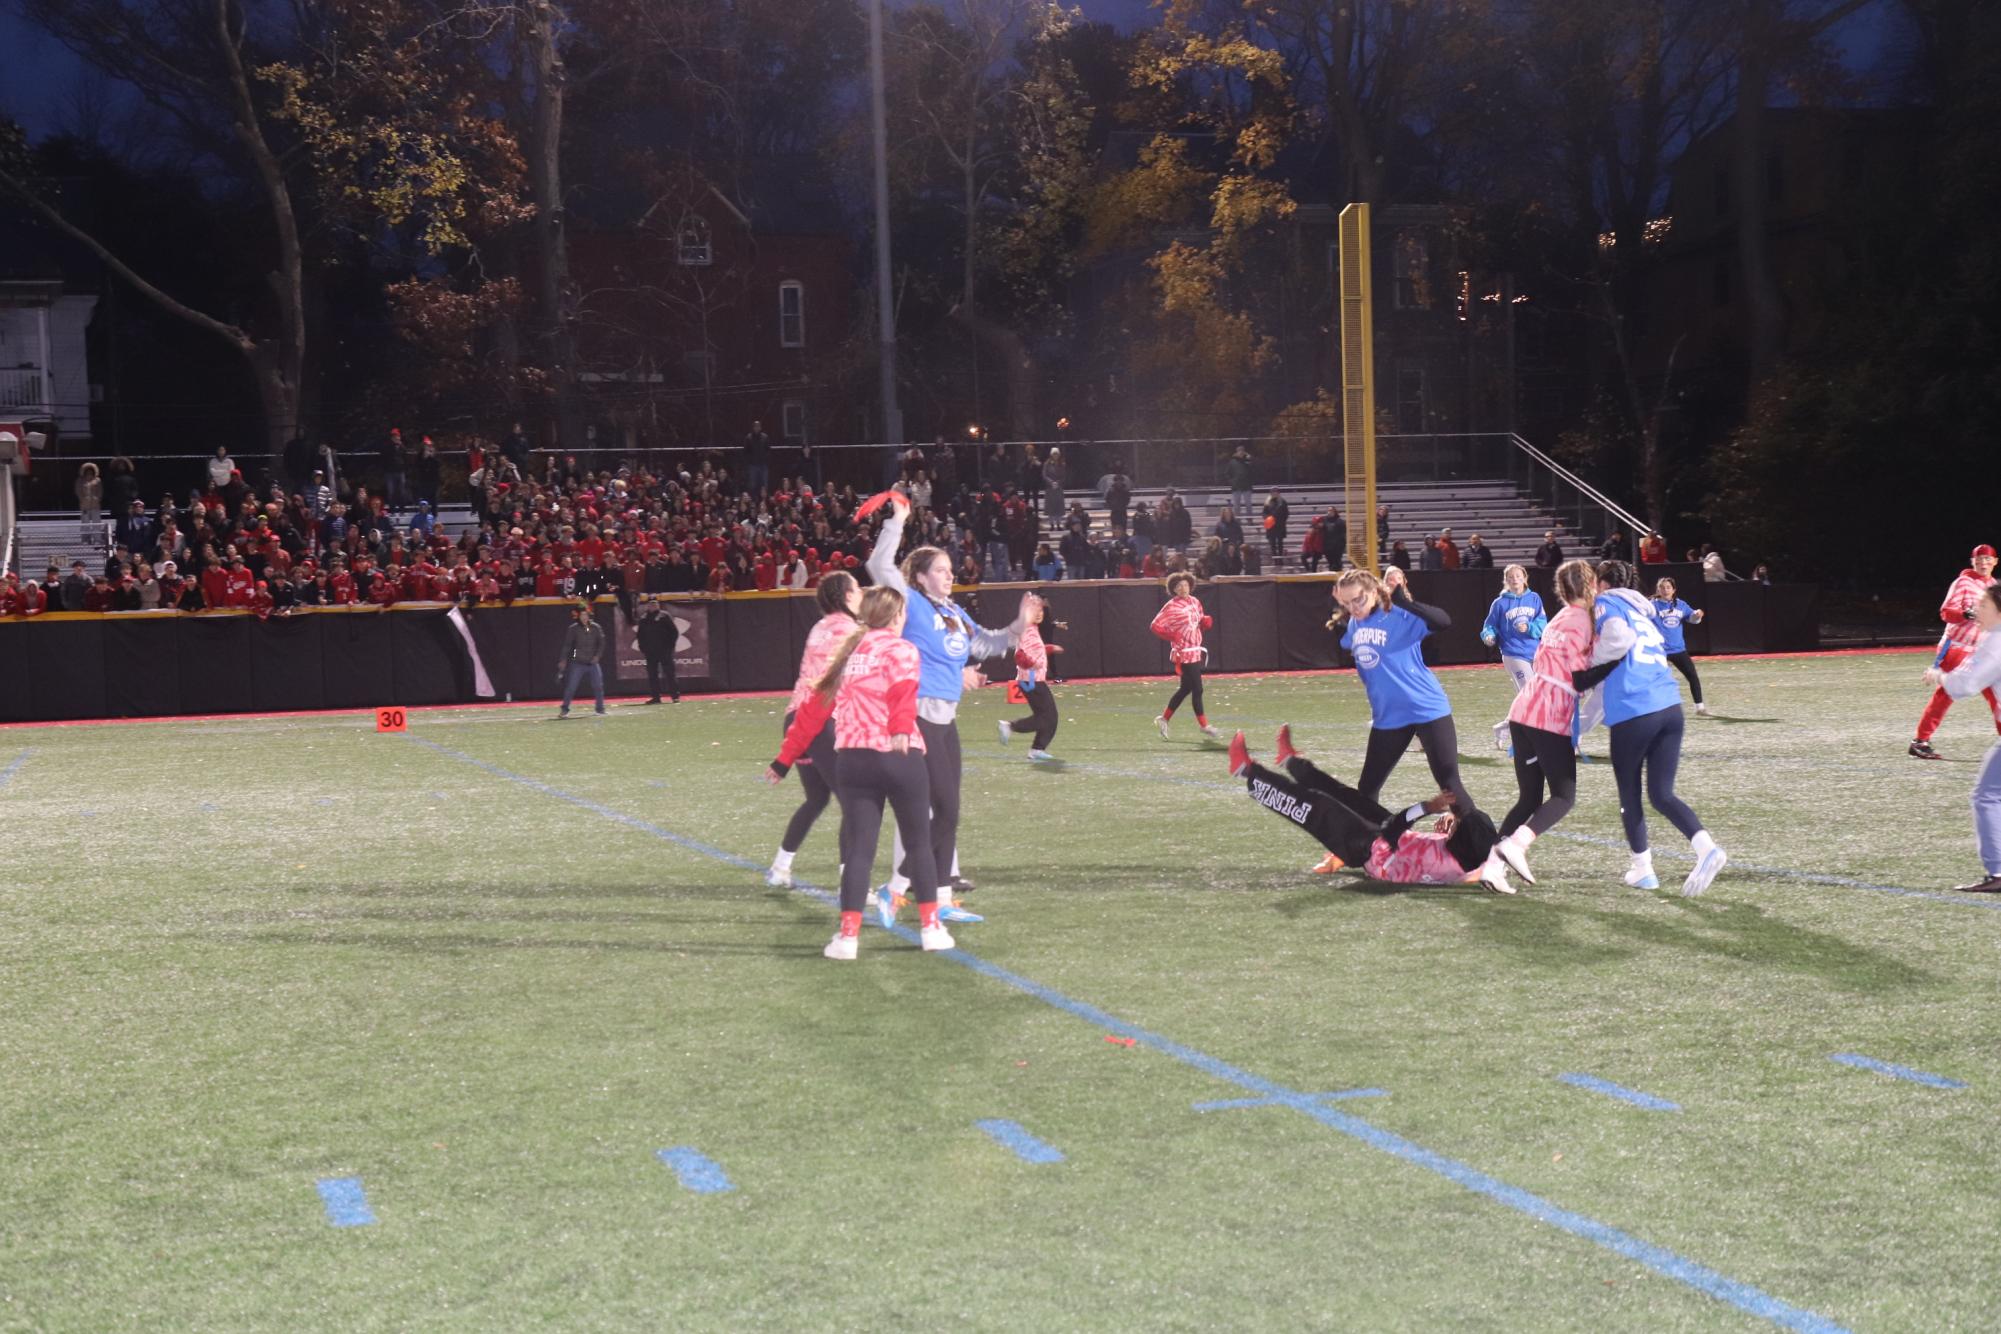 The juniors beat the seniors 23-21 in the annual Powerpuff game on Tuesday, Nov. 21 at Parsons Field.